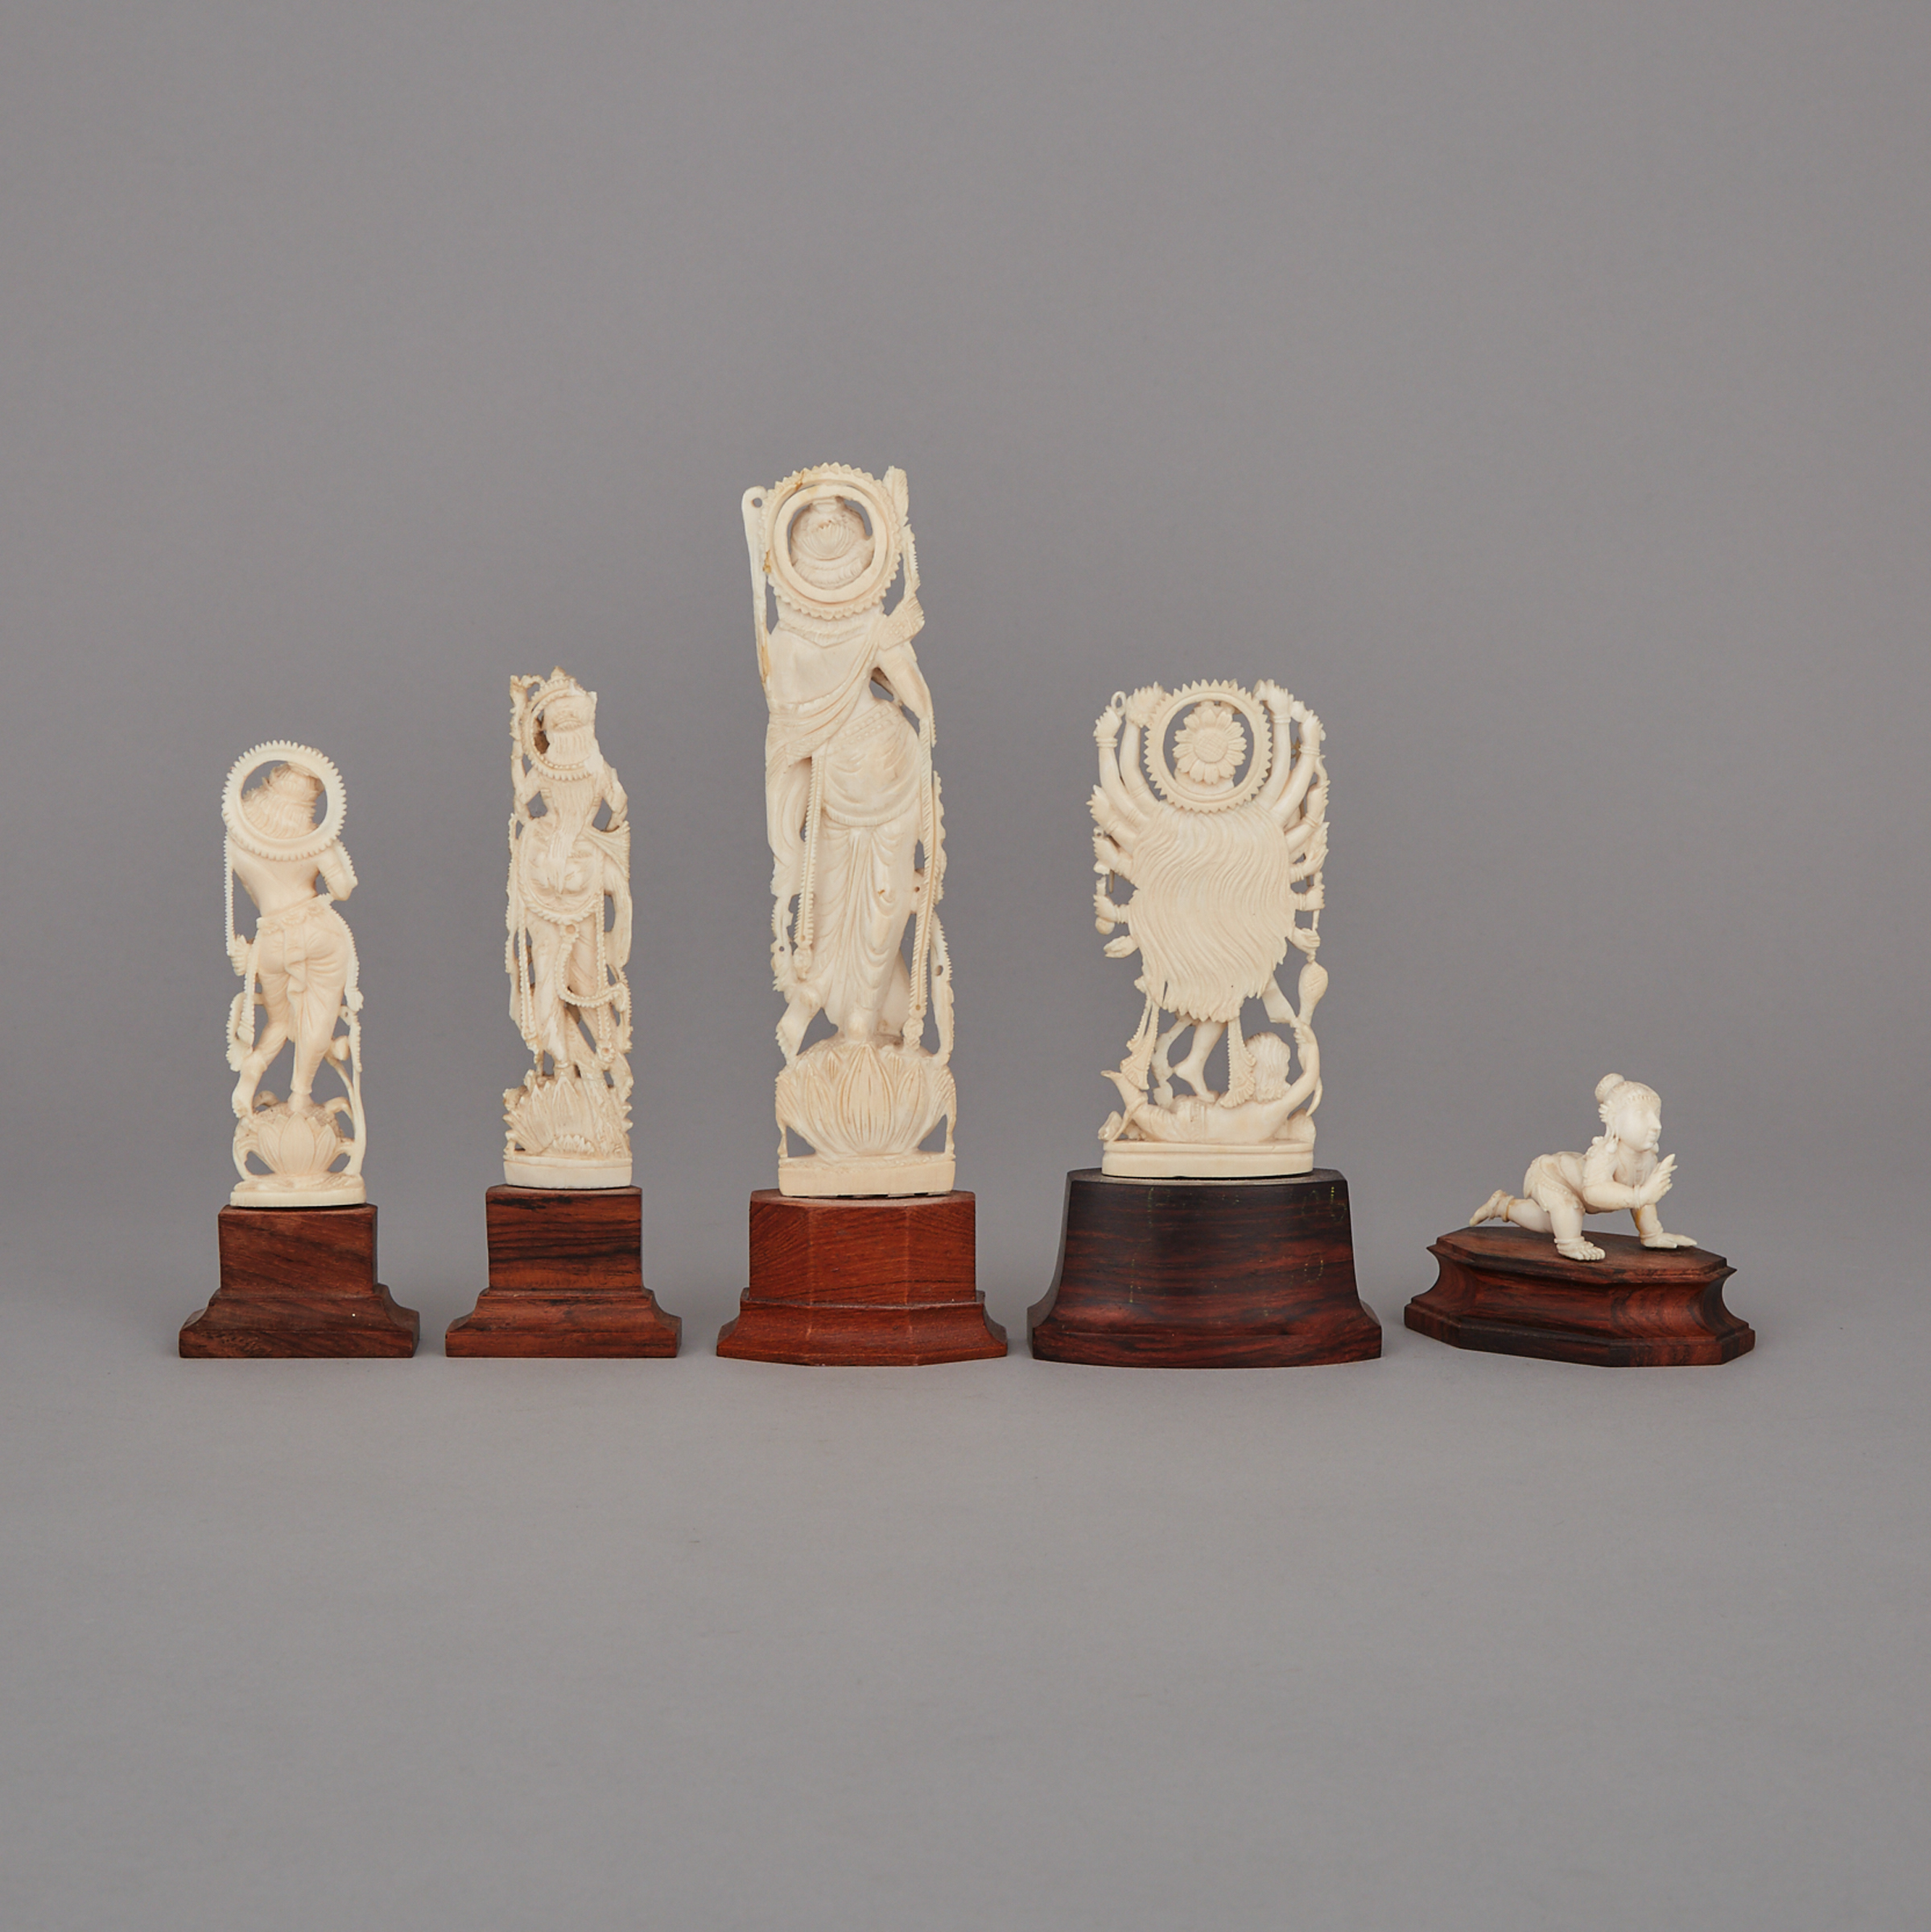 A Group of Five Indian Ivory Carvings